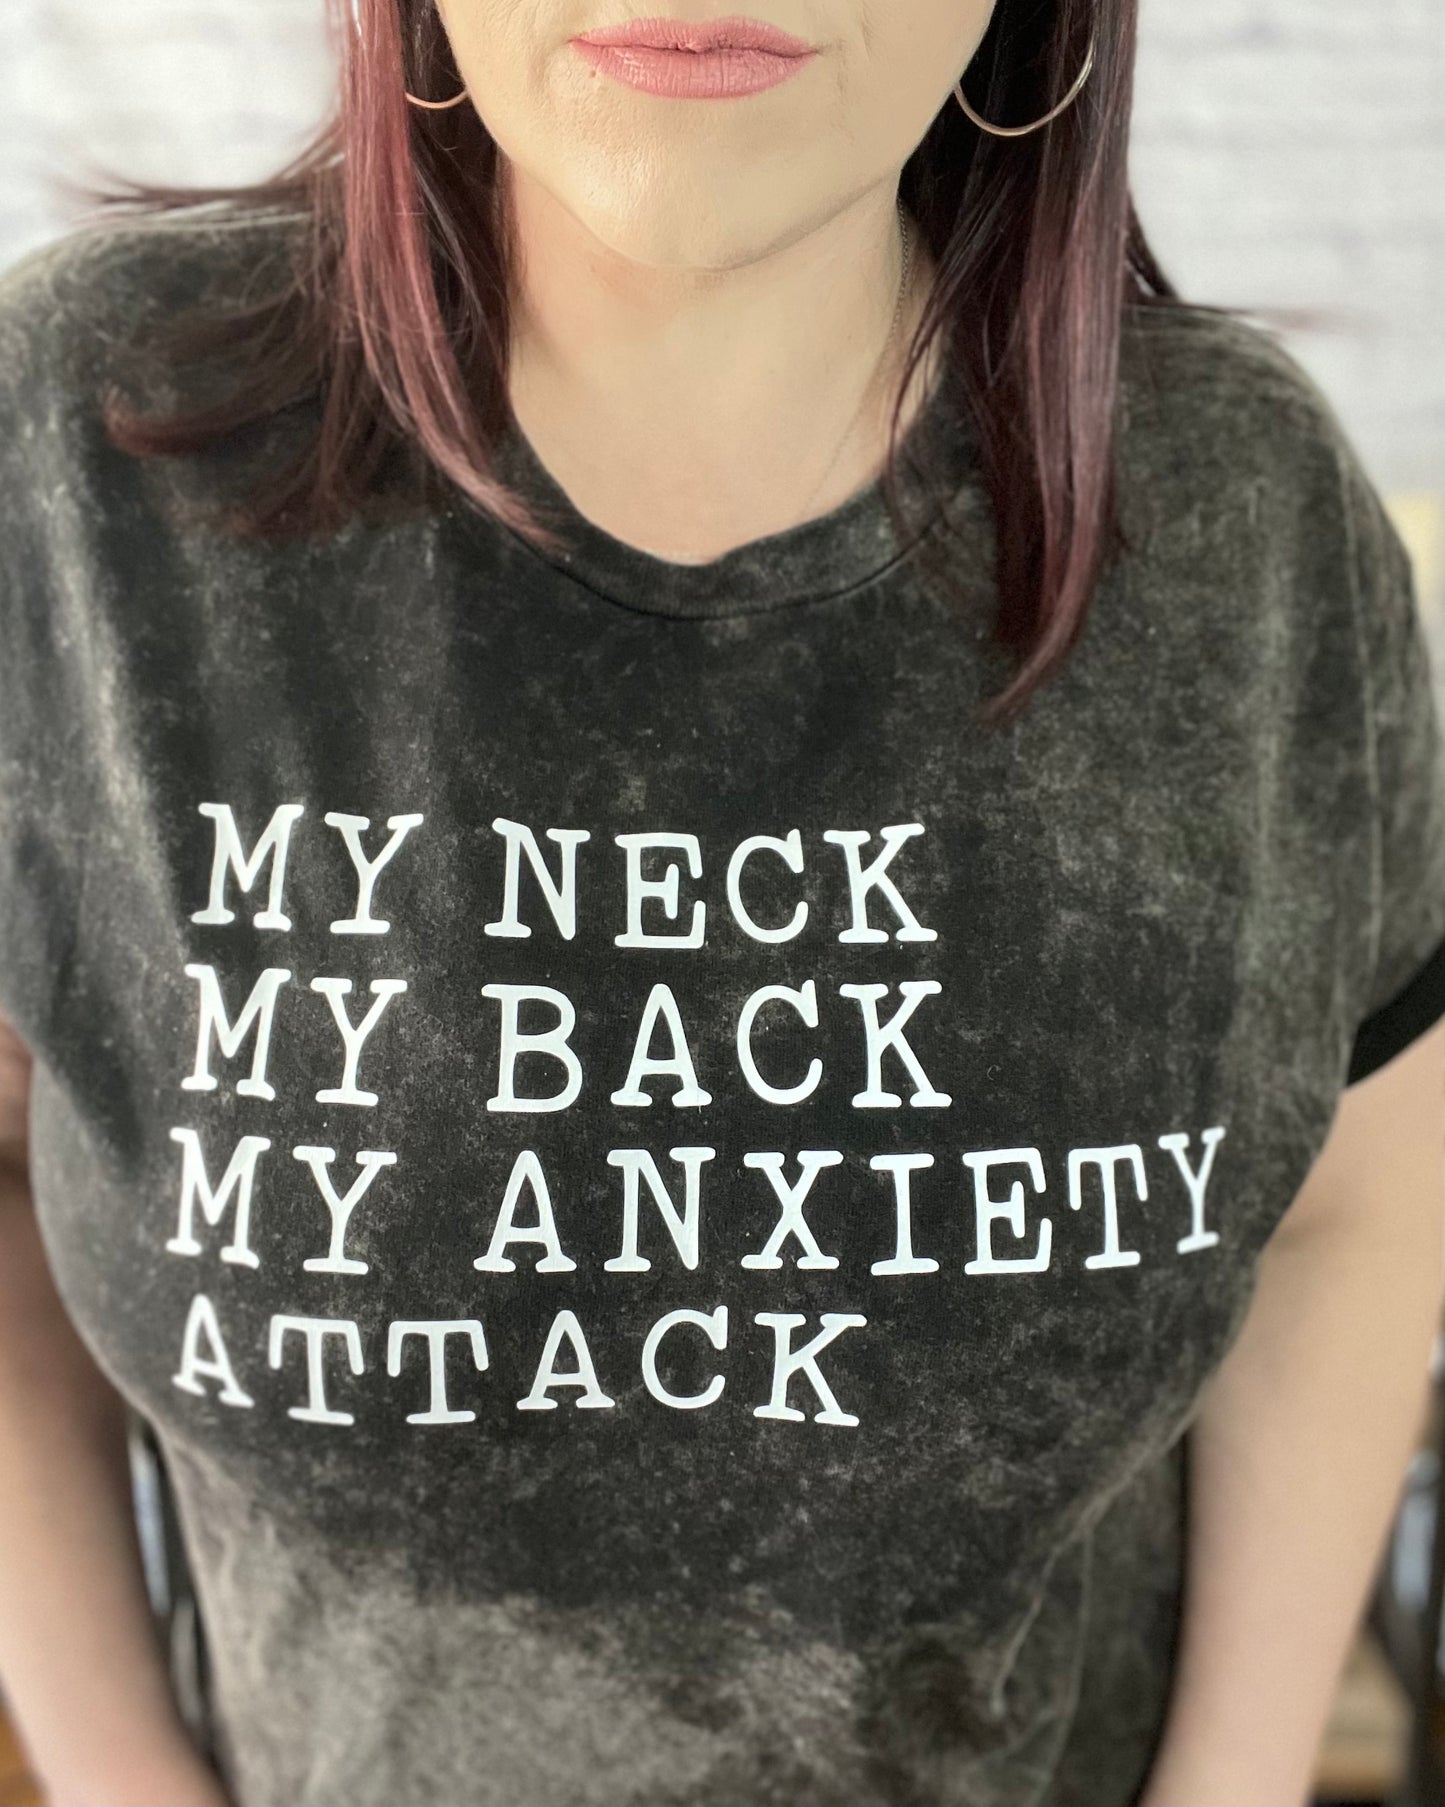 My Neck My Back My Anxiety Attack - Women's shirts -  Rustic Cuts